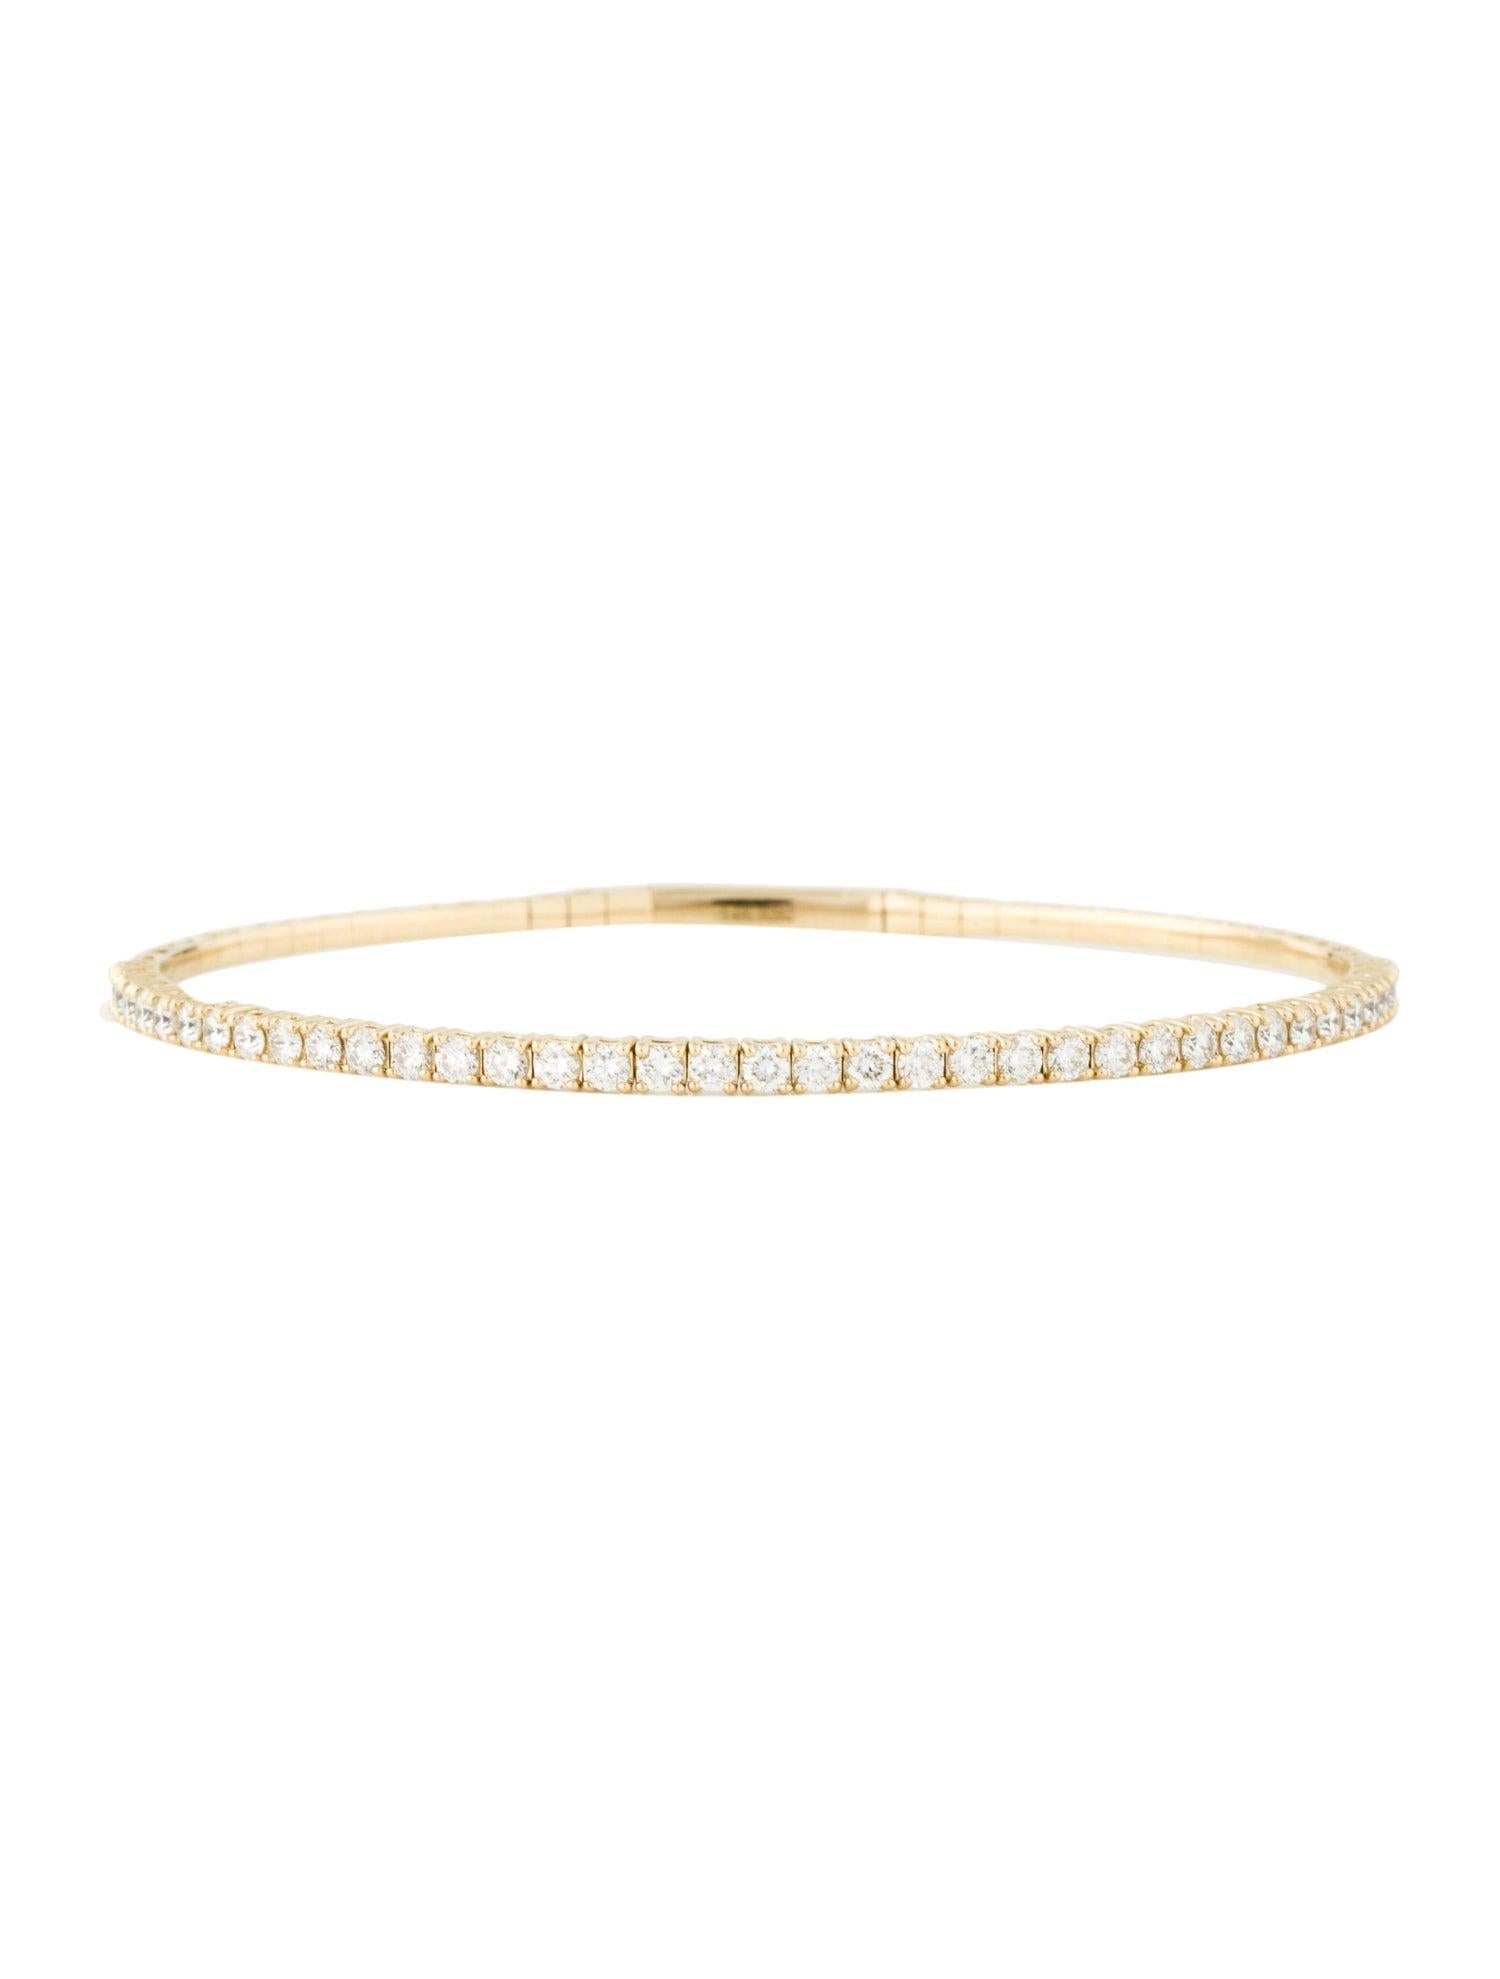 stackable gold bangles